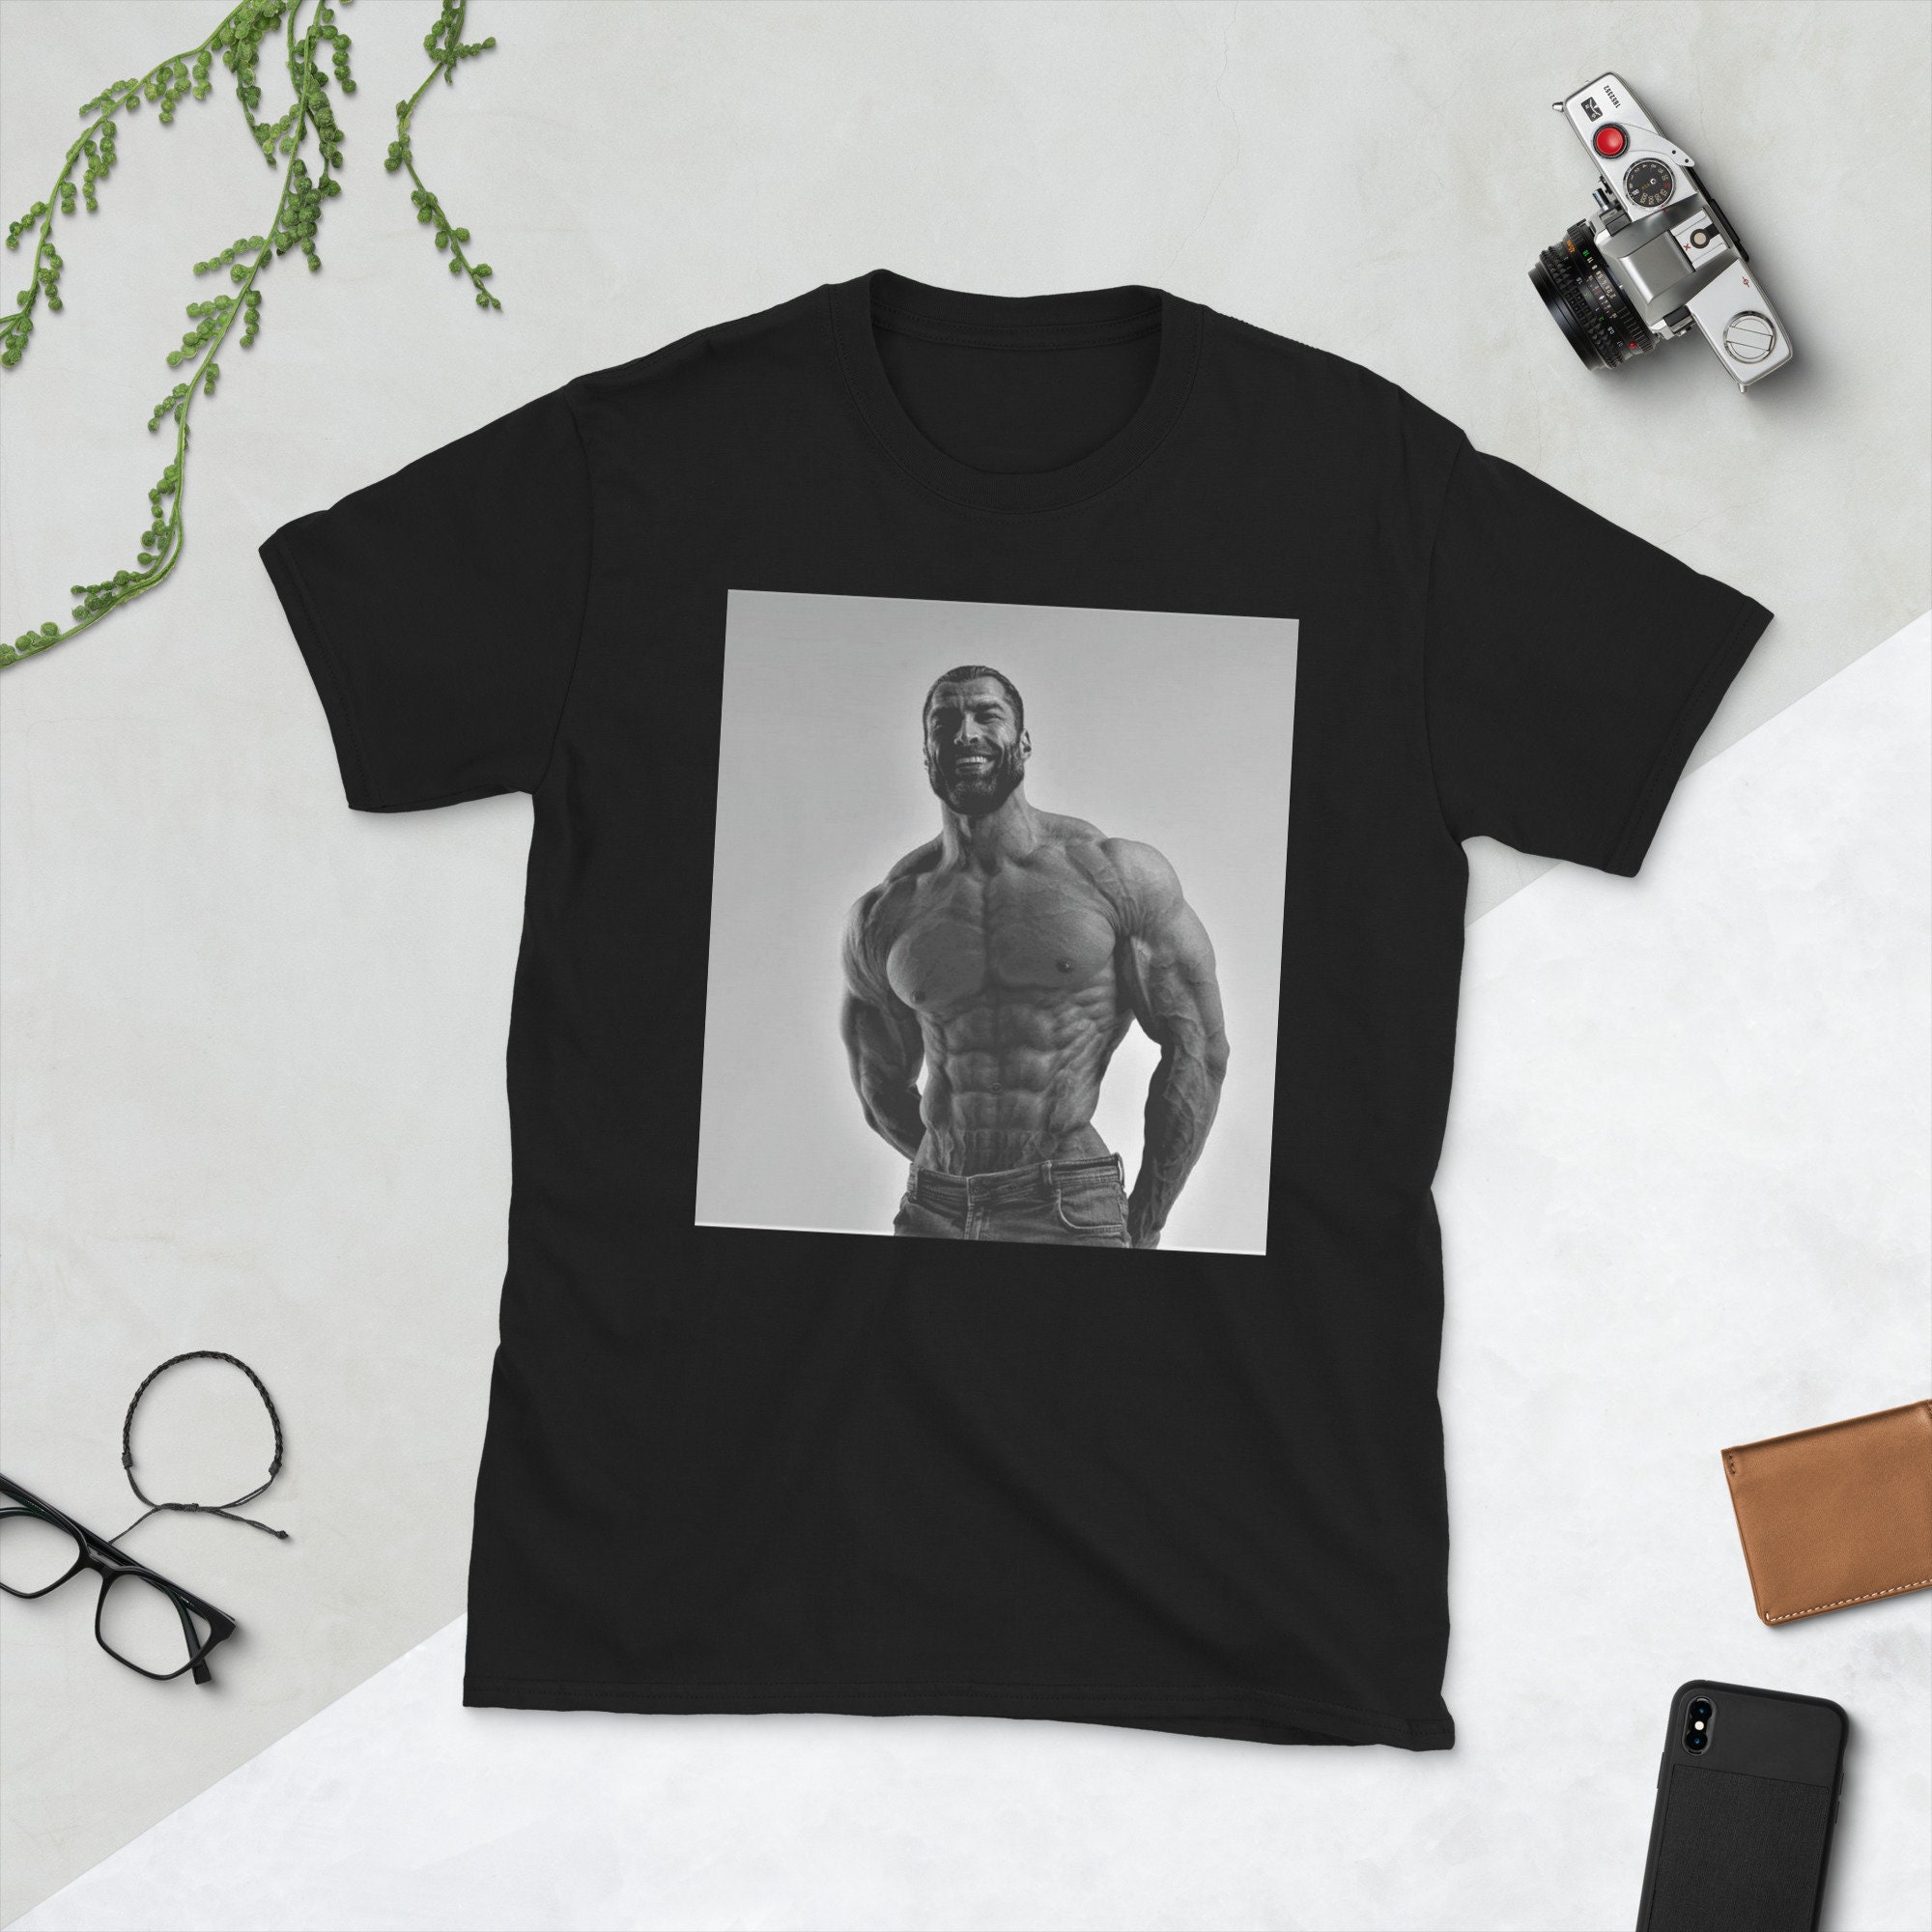 Create meme press roblox t shirt, shirt roblox van pease, muscles to get  - Pictures 